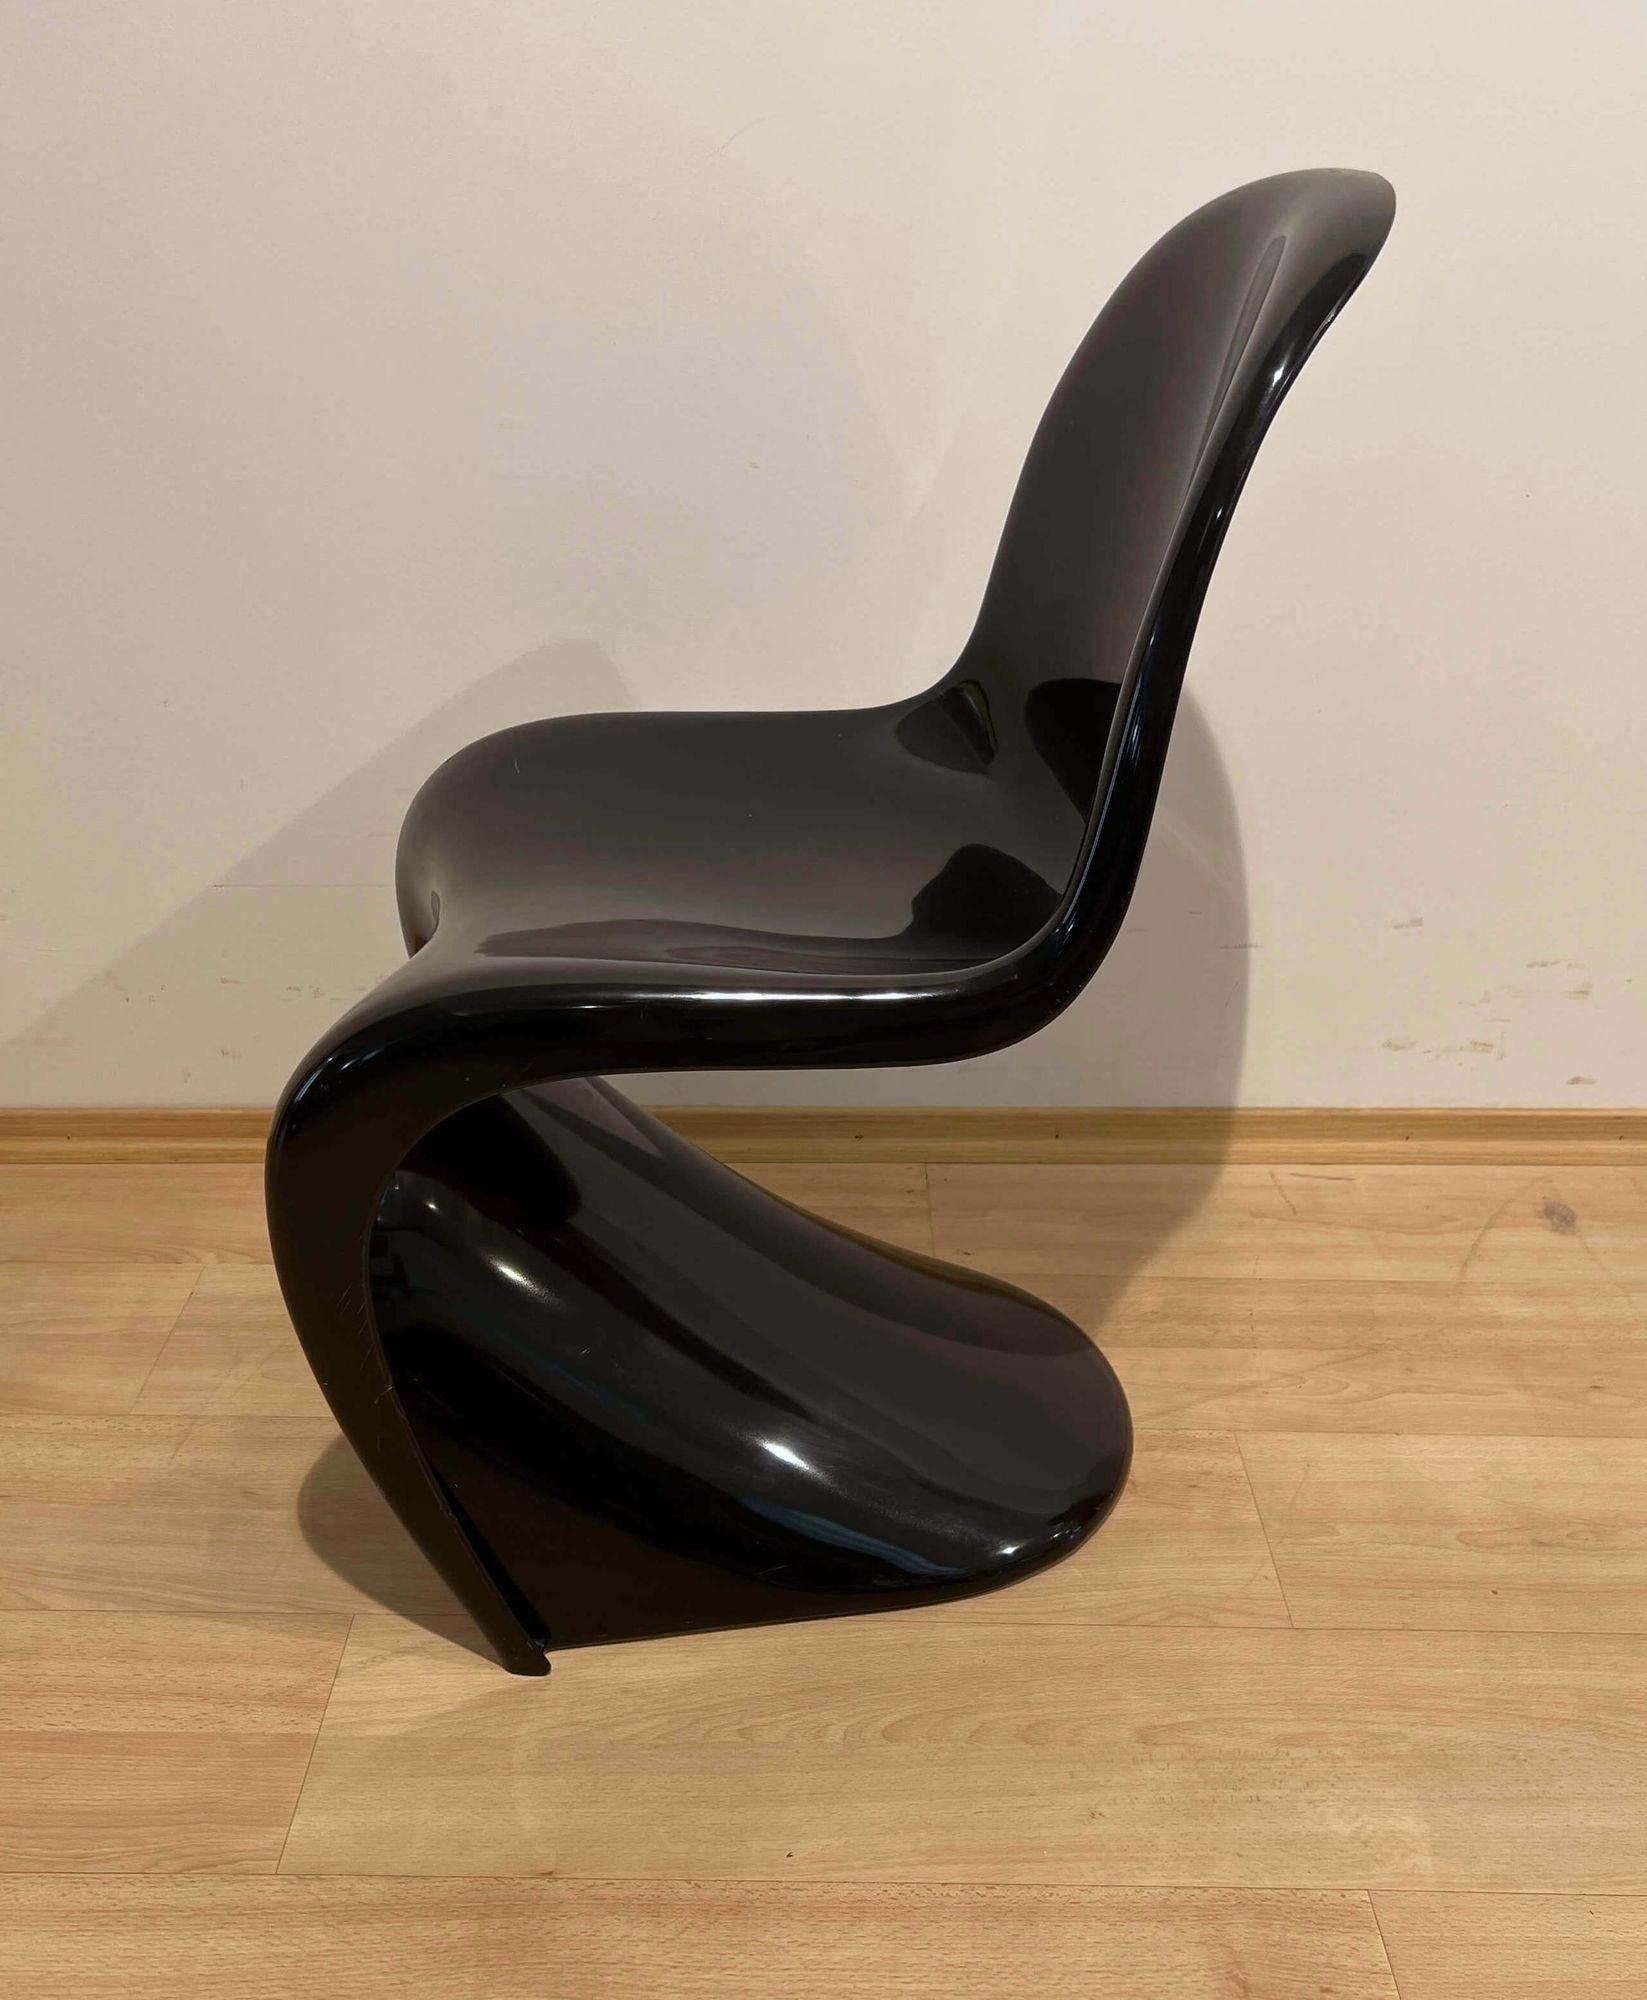 Space Age Verner Panton ‚Panton’ Cantilever Chair in Black Pu, Germany, 1971 For Sale